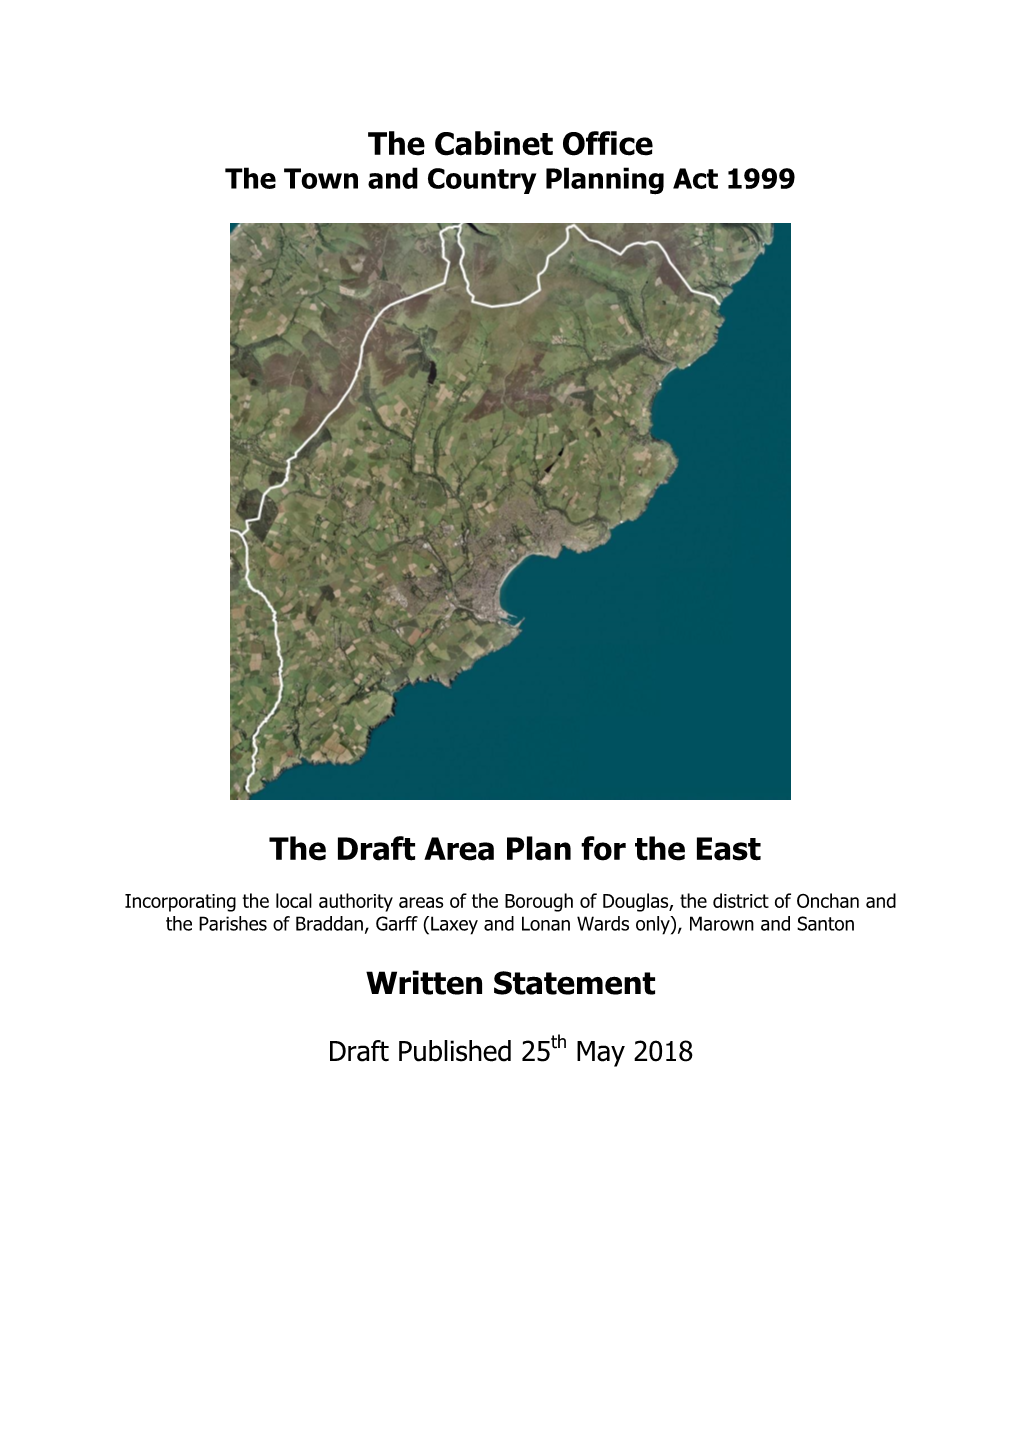 The Cabinet Office the Draft Area Plan for the East Written Statement